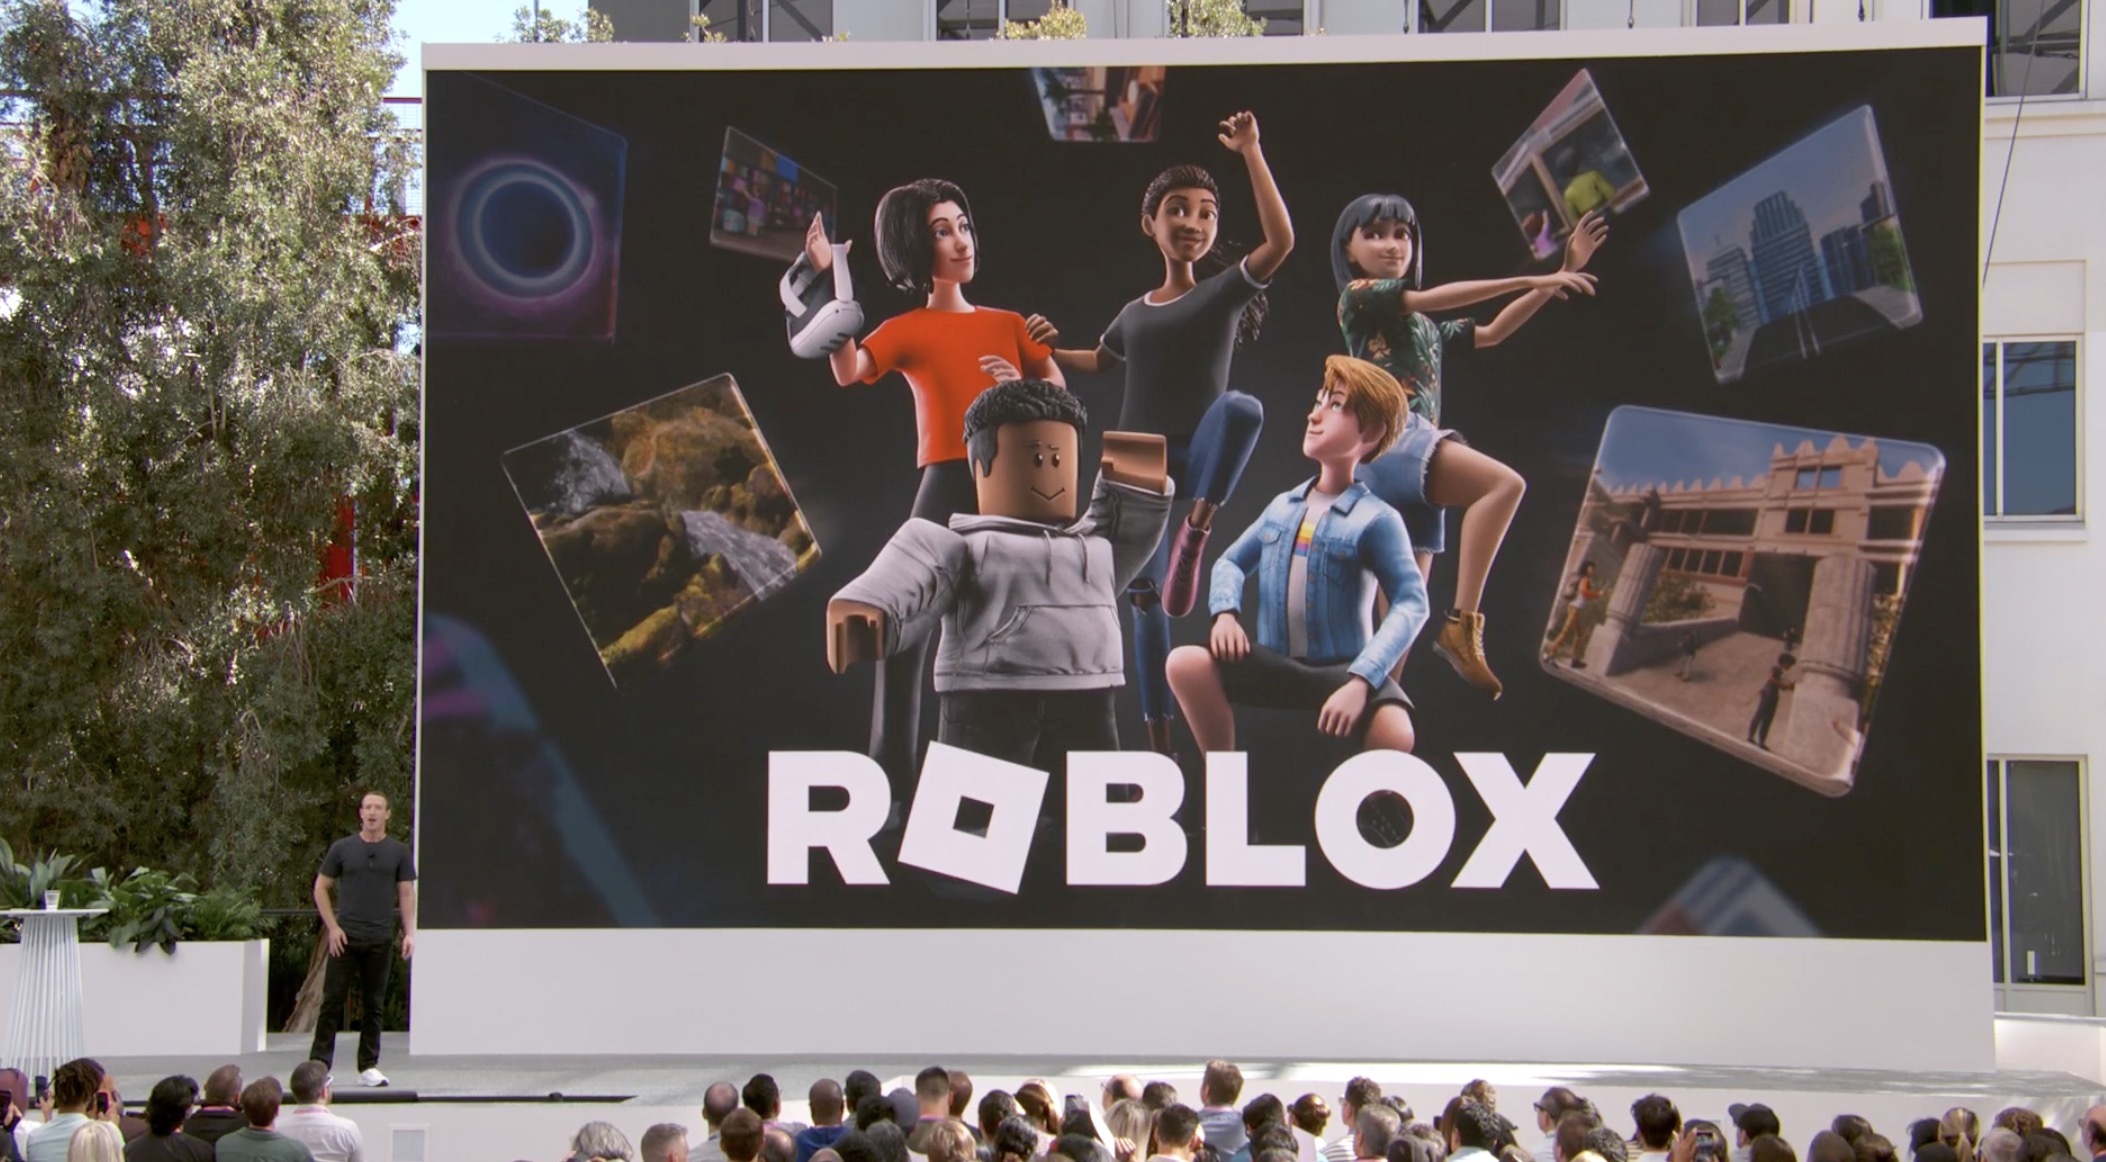 Roblox may be coming to Quest 2 — here's what we know